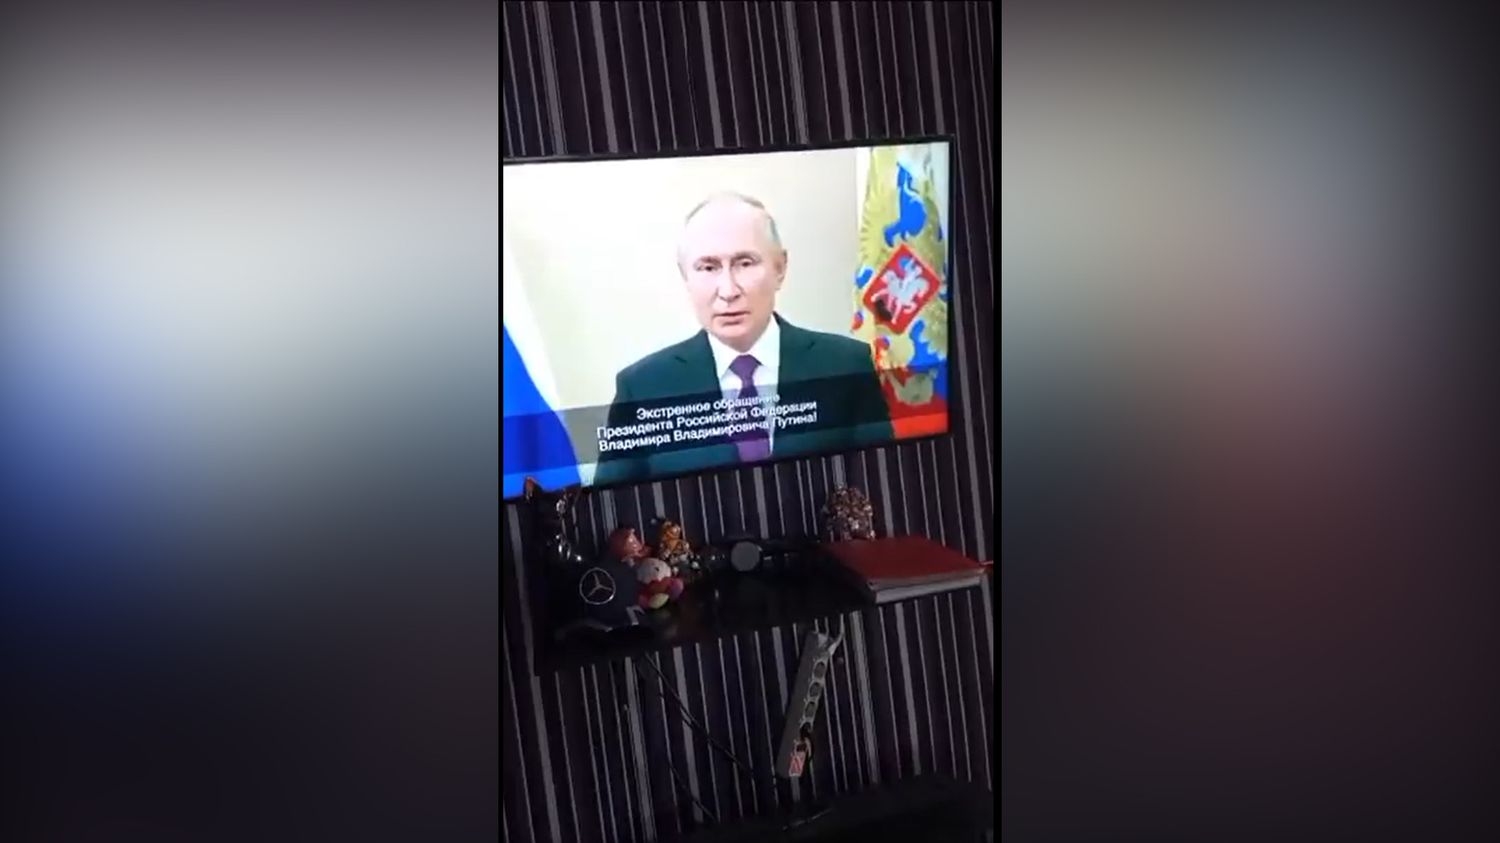 War in Ukraine: After a hack, a false message from Vladimir Putin on Russian radio and television announces 